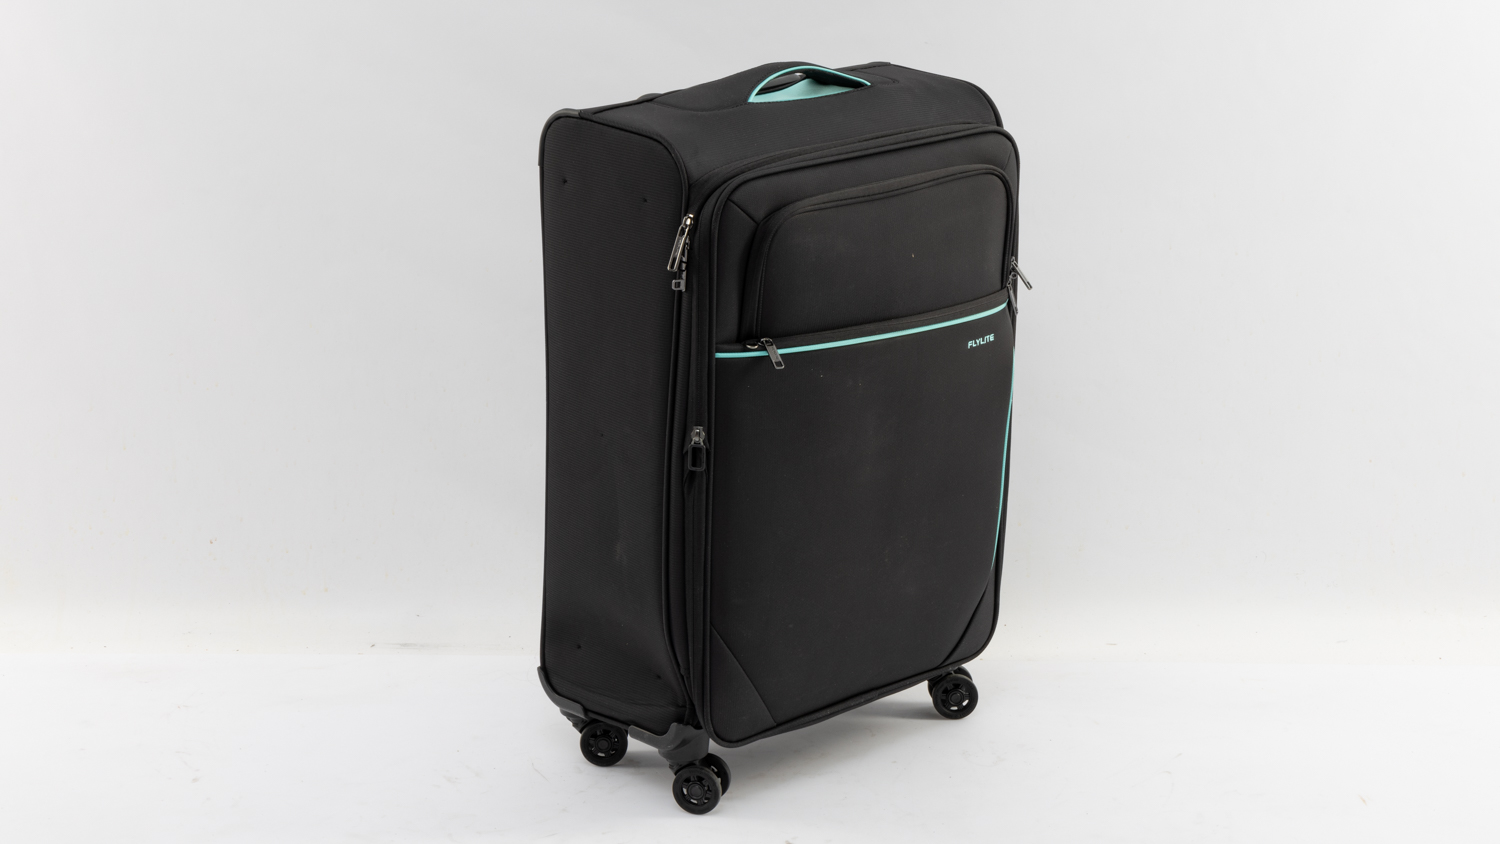 Flylite Spin Air 4 72cm Suitcase carousel image